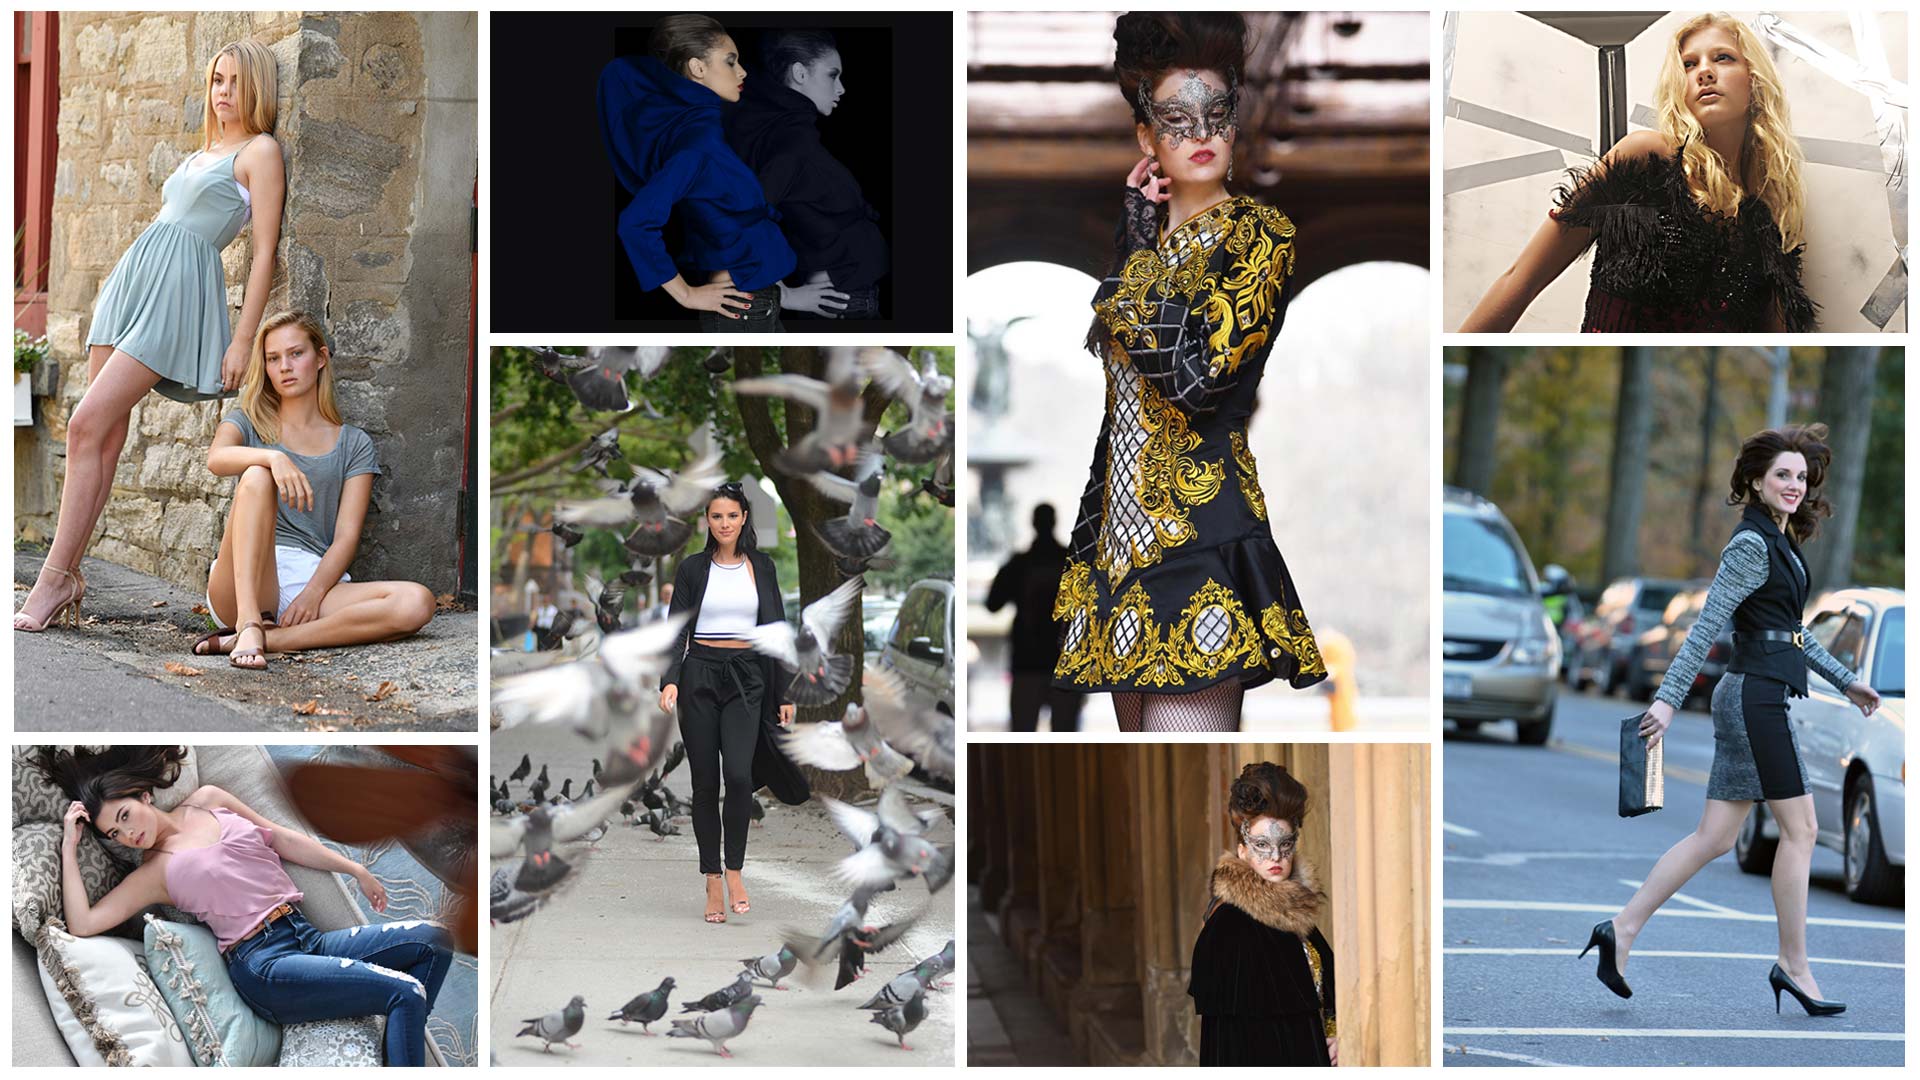 Looking for the best Fashion Photographer in New York? Your search end's here